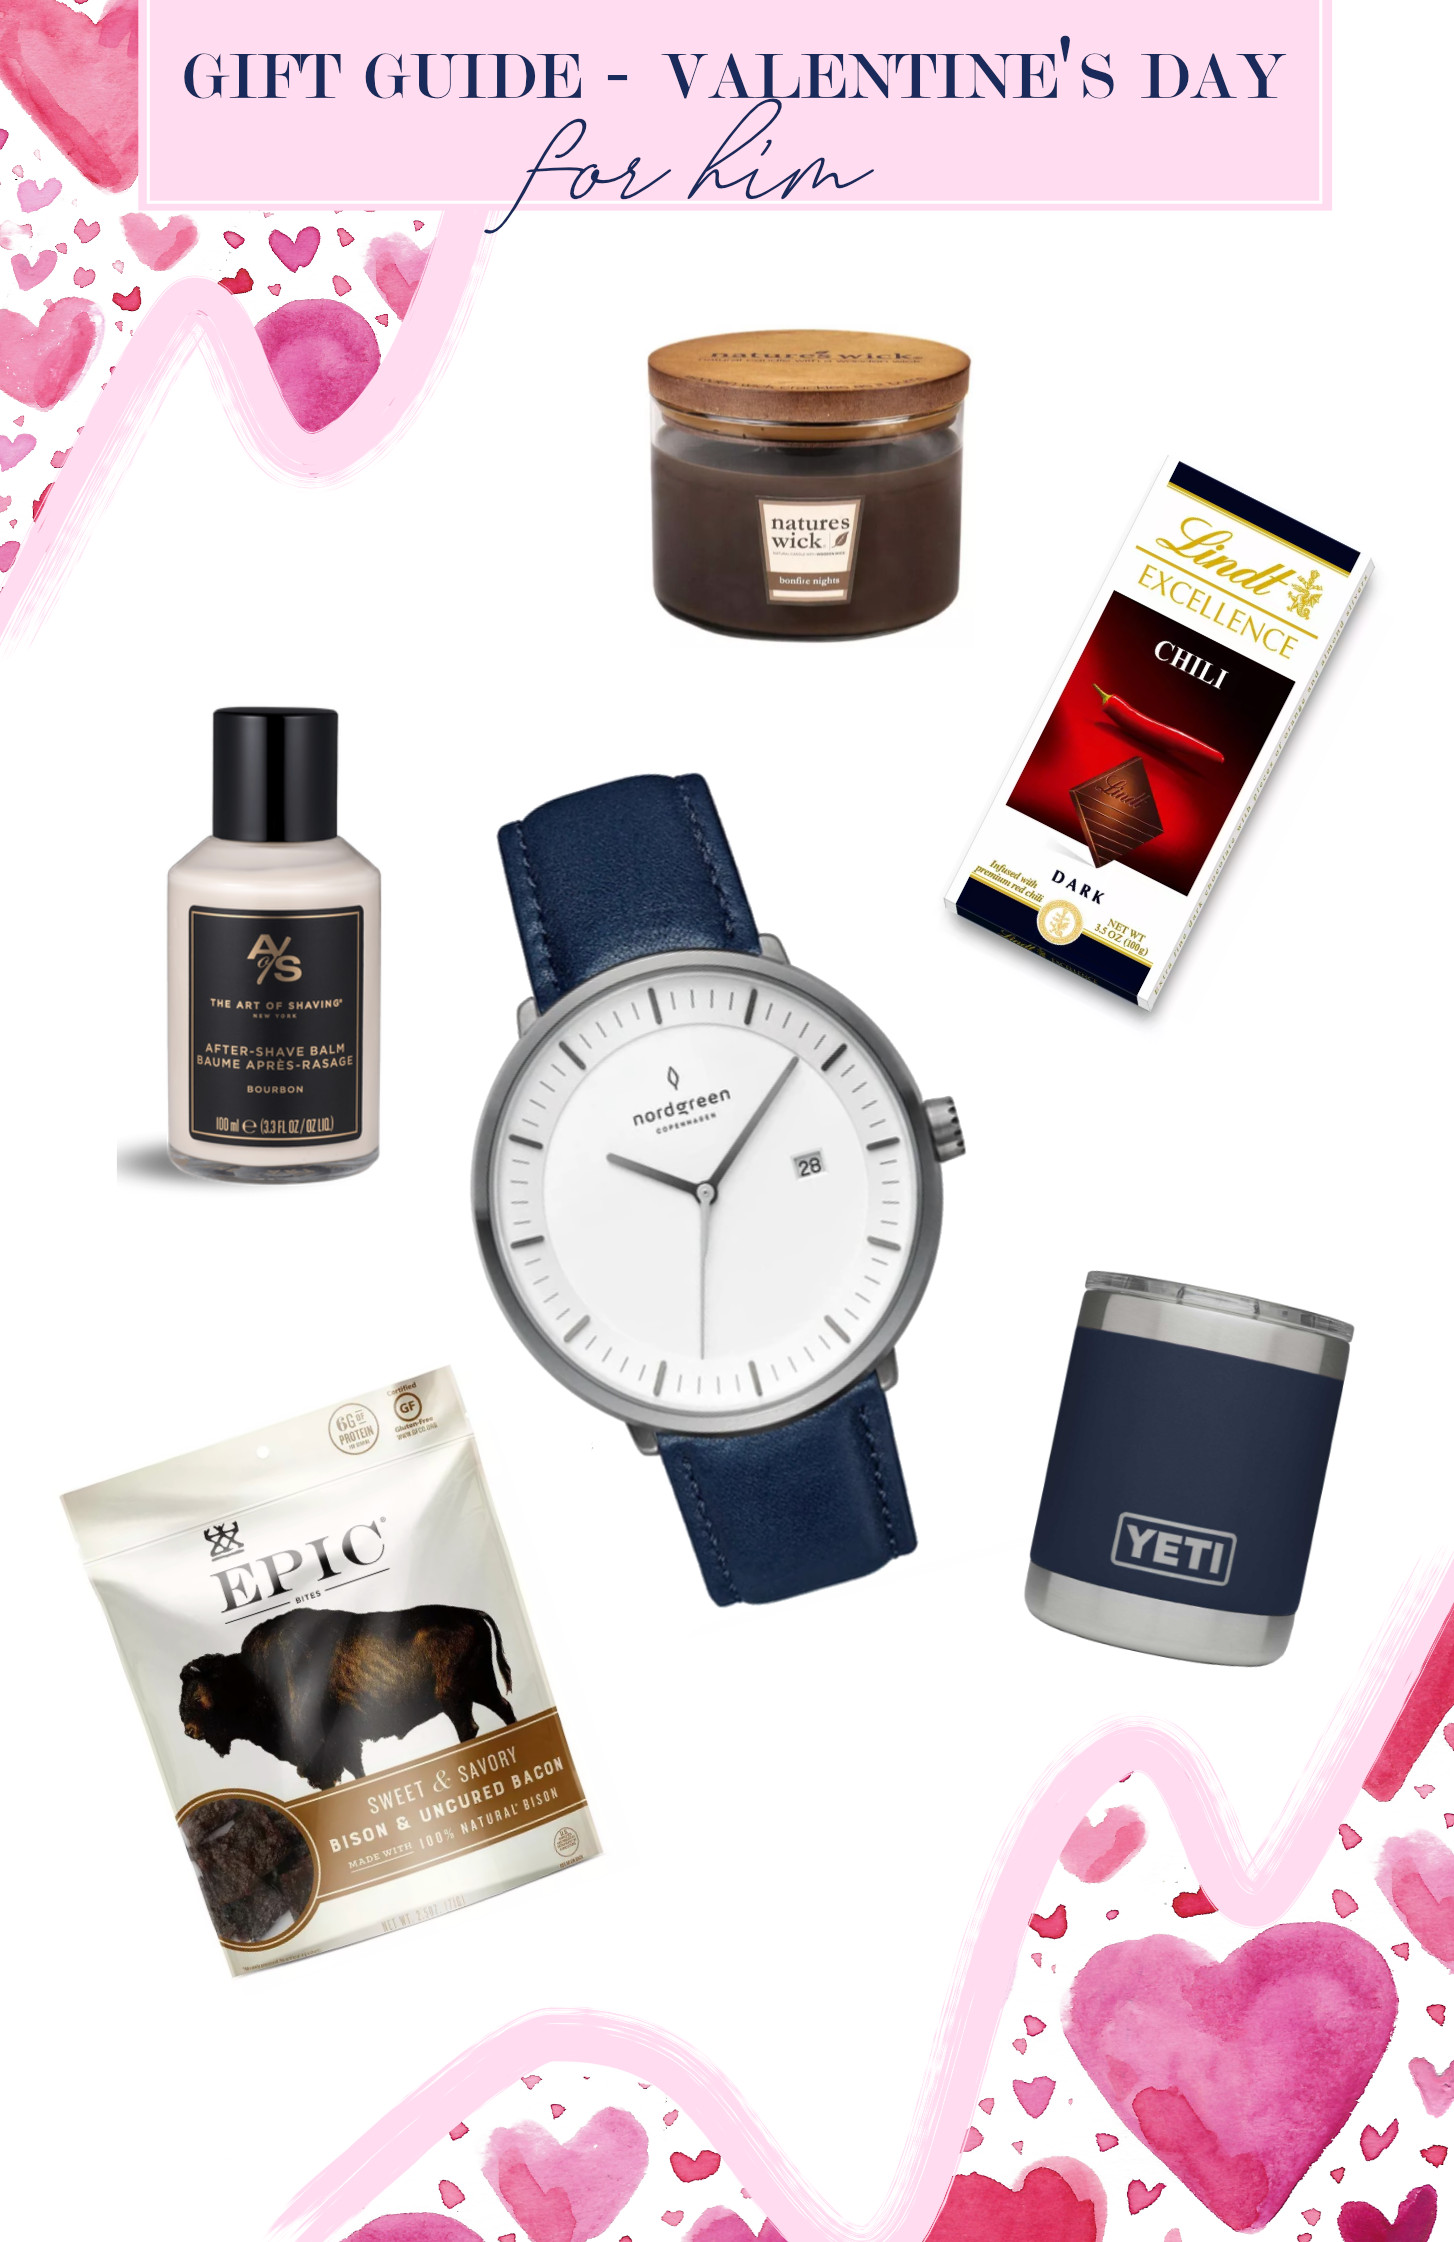 Valentines Day Gift Ideas 2020
 His and Her Valentine s Day Gift Guides in 2020